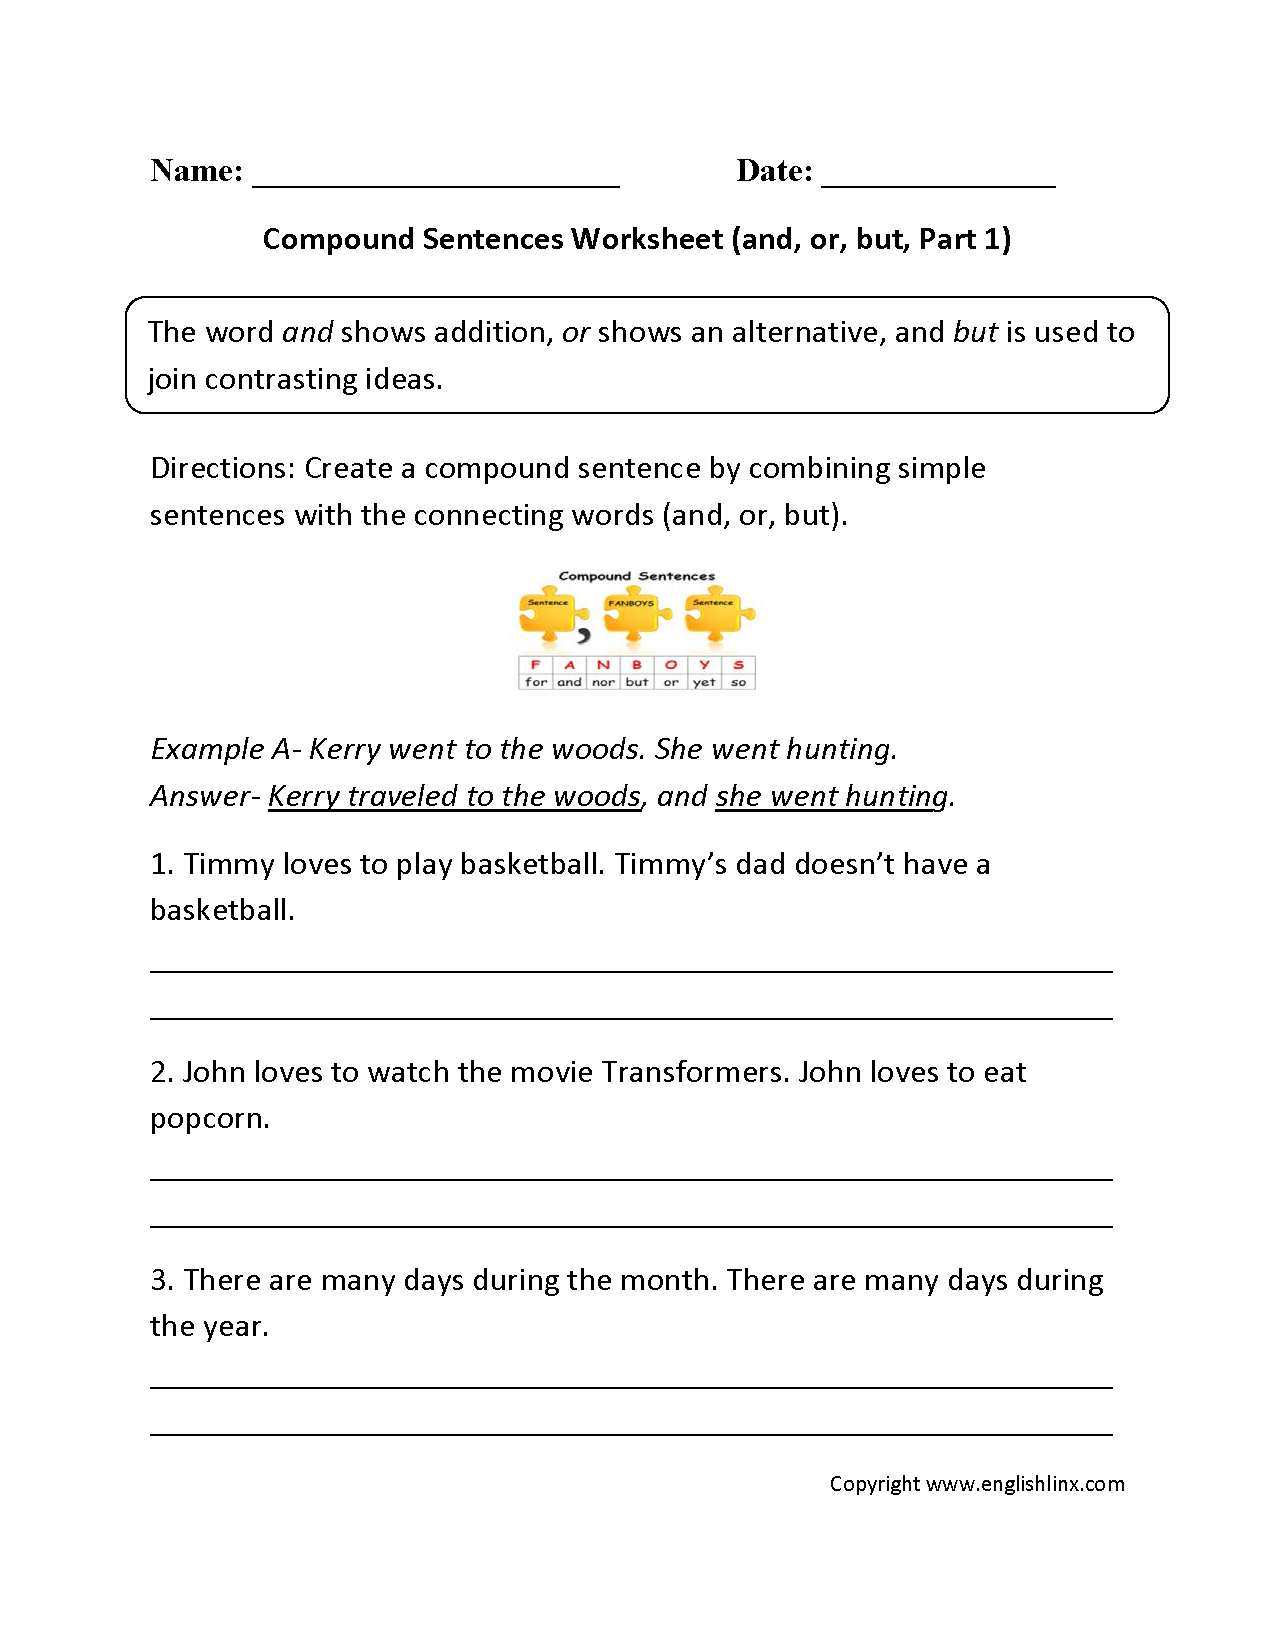 Compound Sentences Worksheets | Englishlinx Board | Pinterest - Free Printable Worksheets On Simple Compound And Complex Sentences